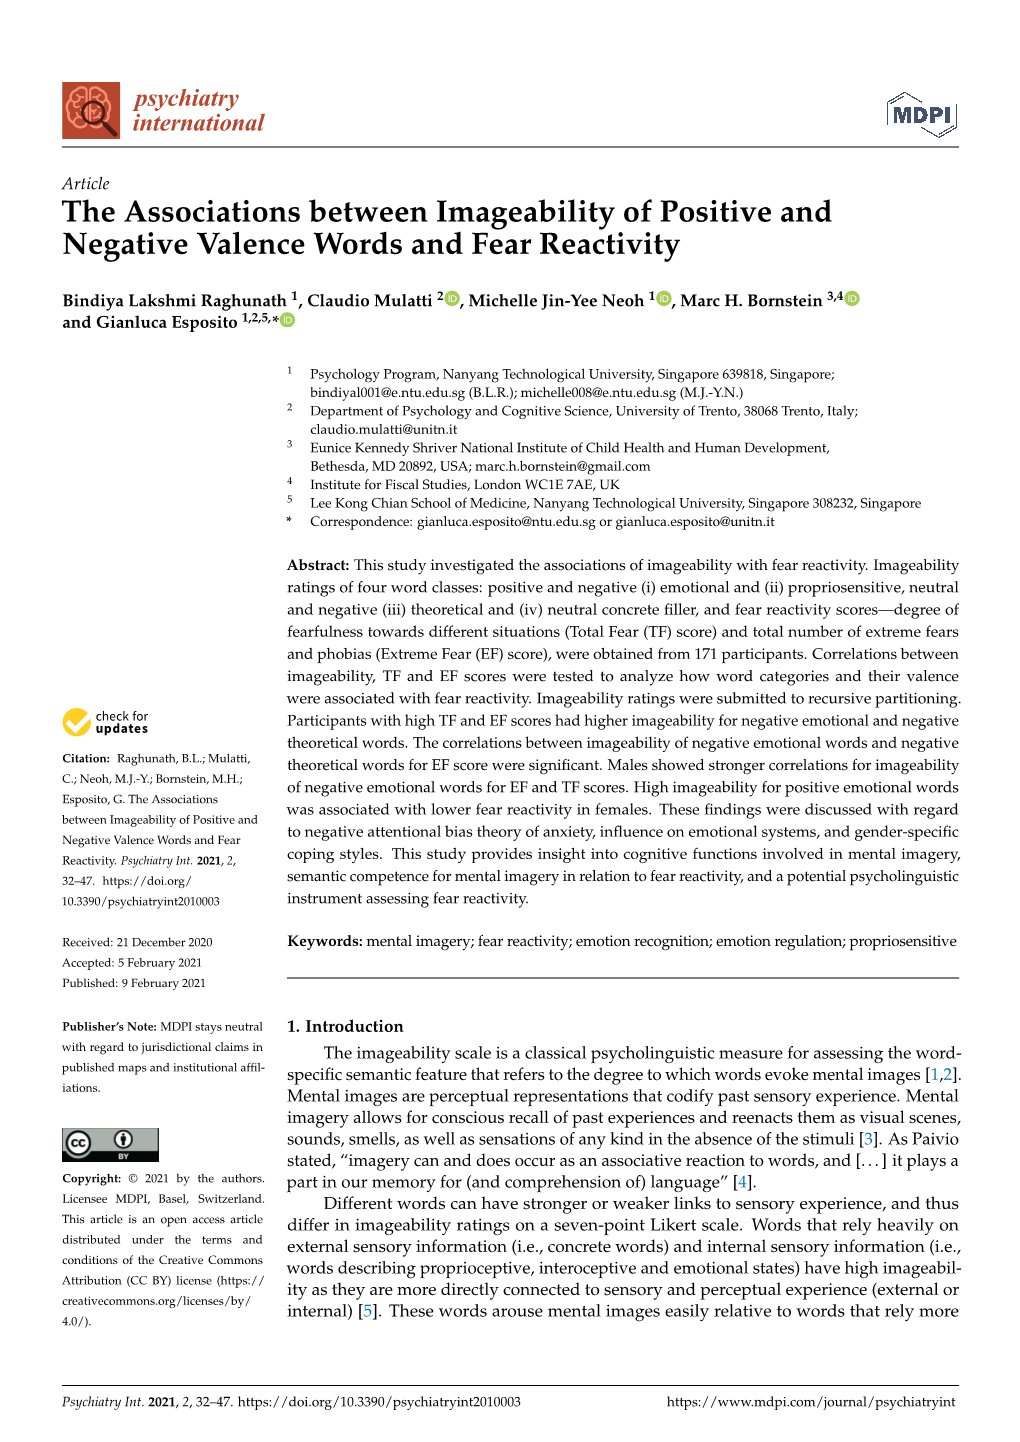 The Associations Between Imageability of Positive and Negative Valence Words and Fear Reactivity